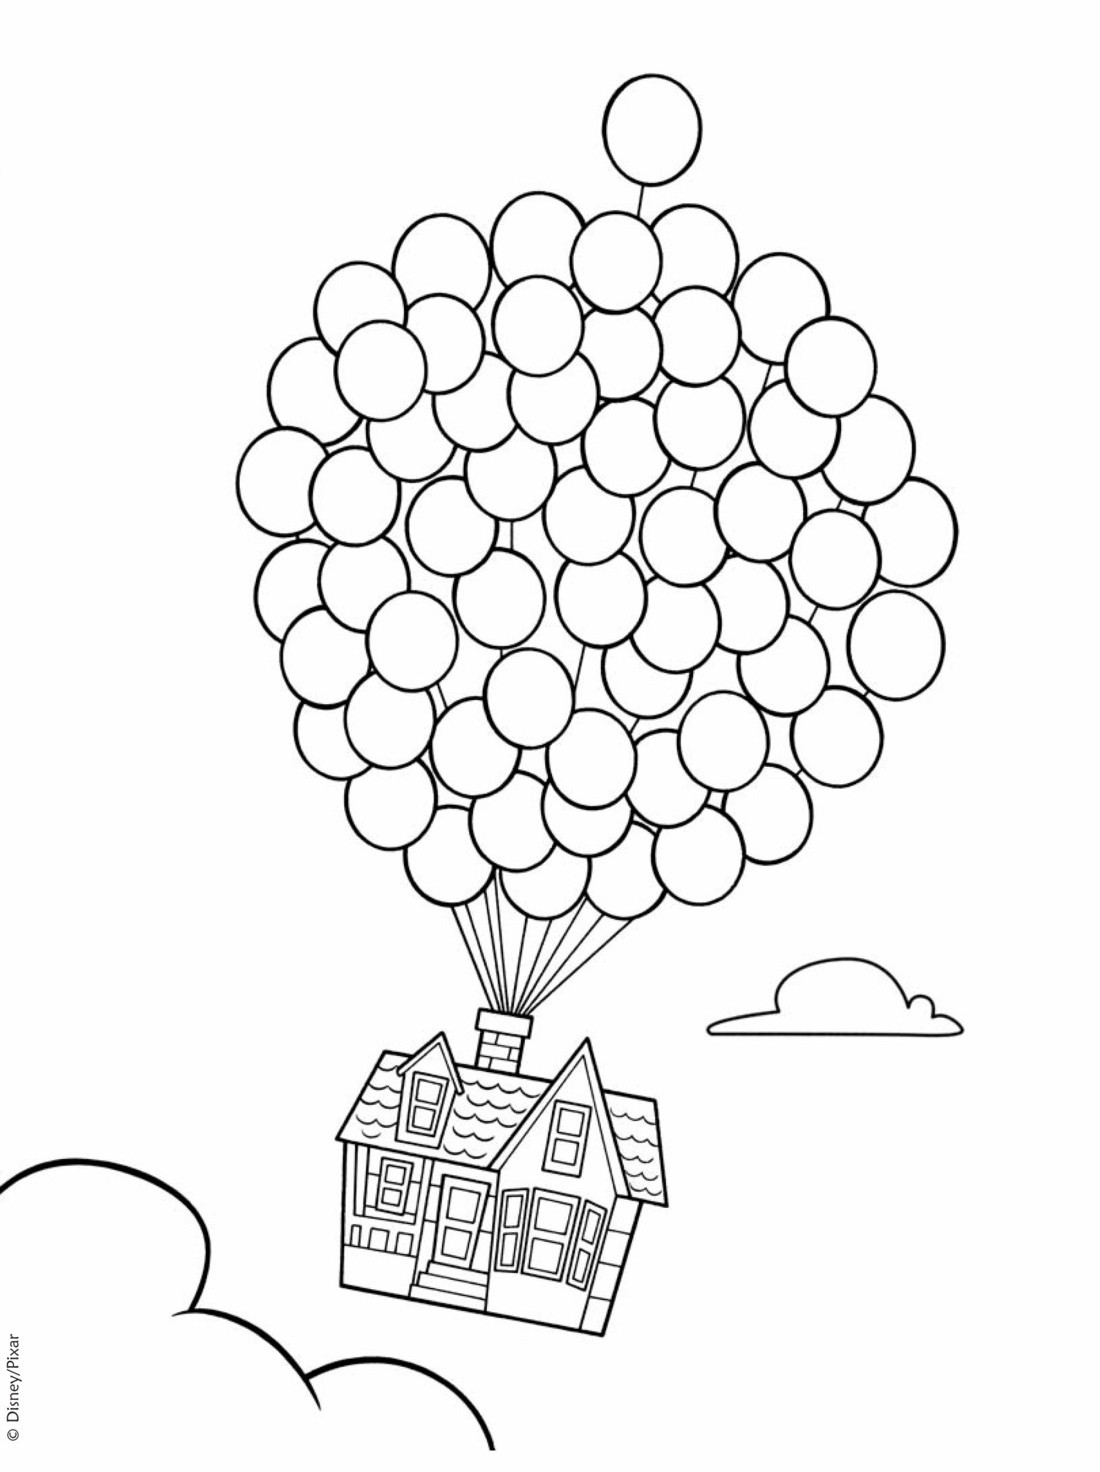 up coloring pages